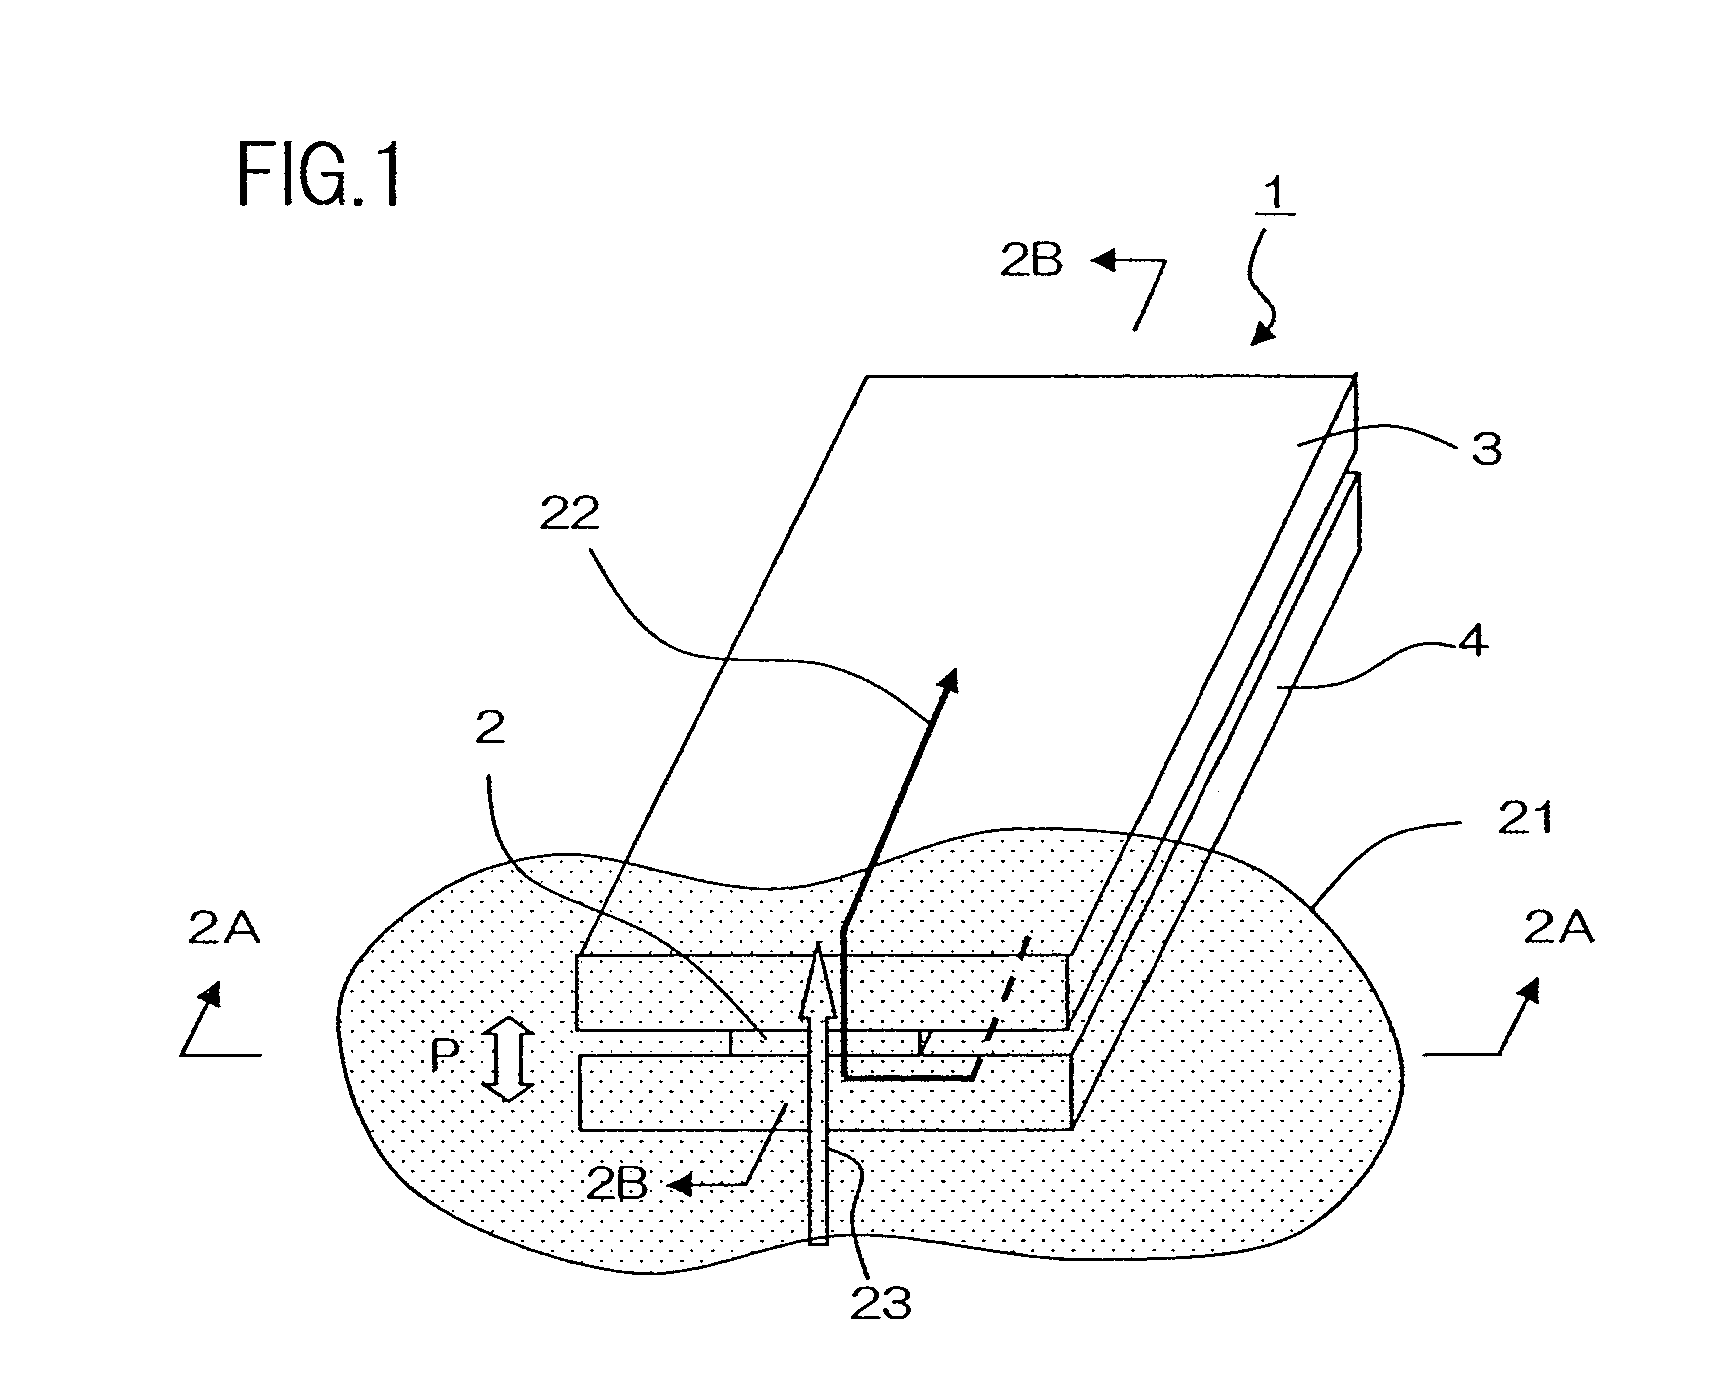 Magnetic field detecting element having thin stack with a plurality of free layers and thick bias magnetic layer